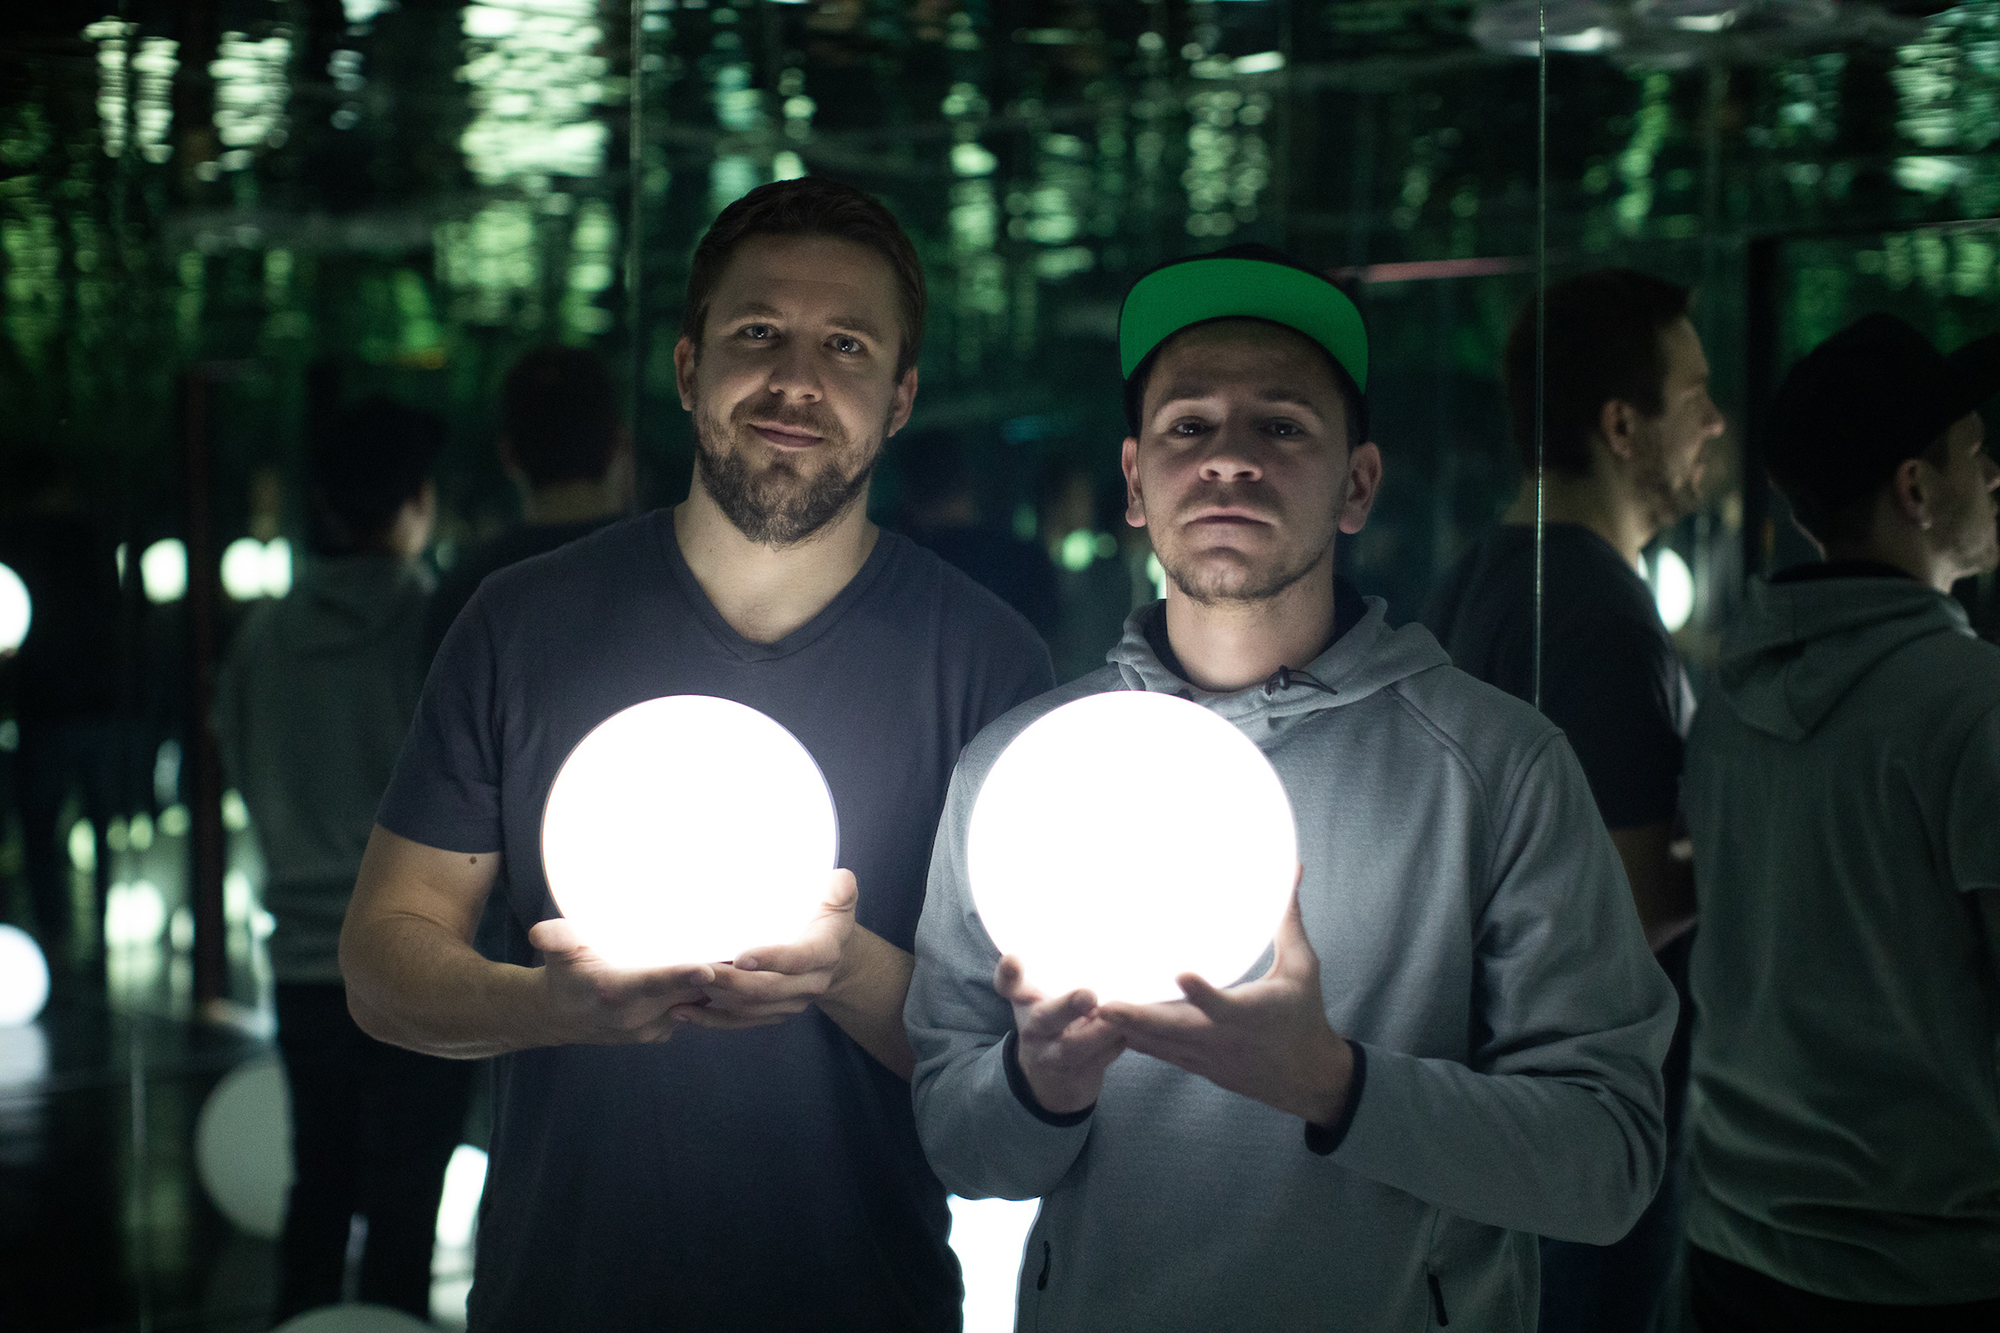 Two men standing in a mirror-clad room carrying glowing sphere lamps.